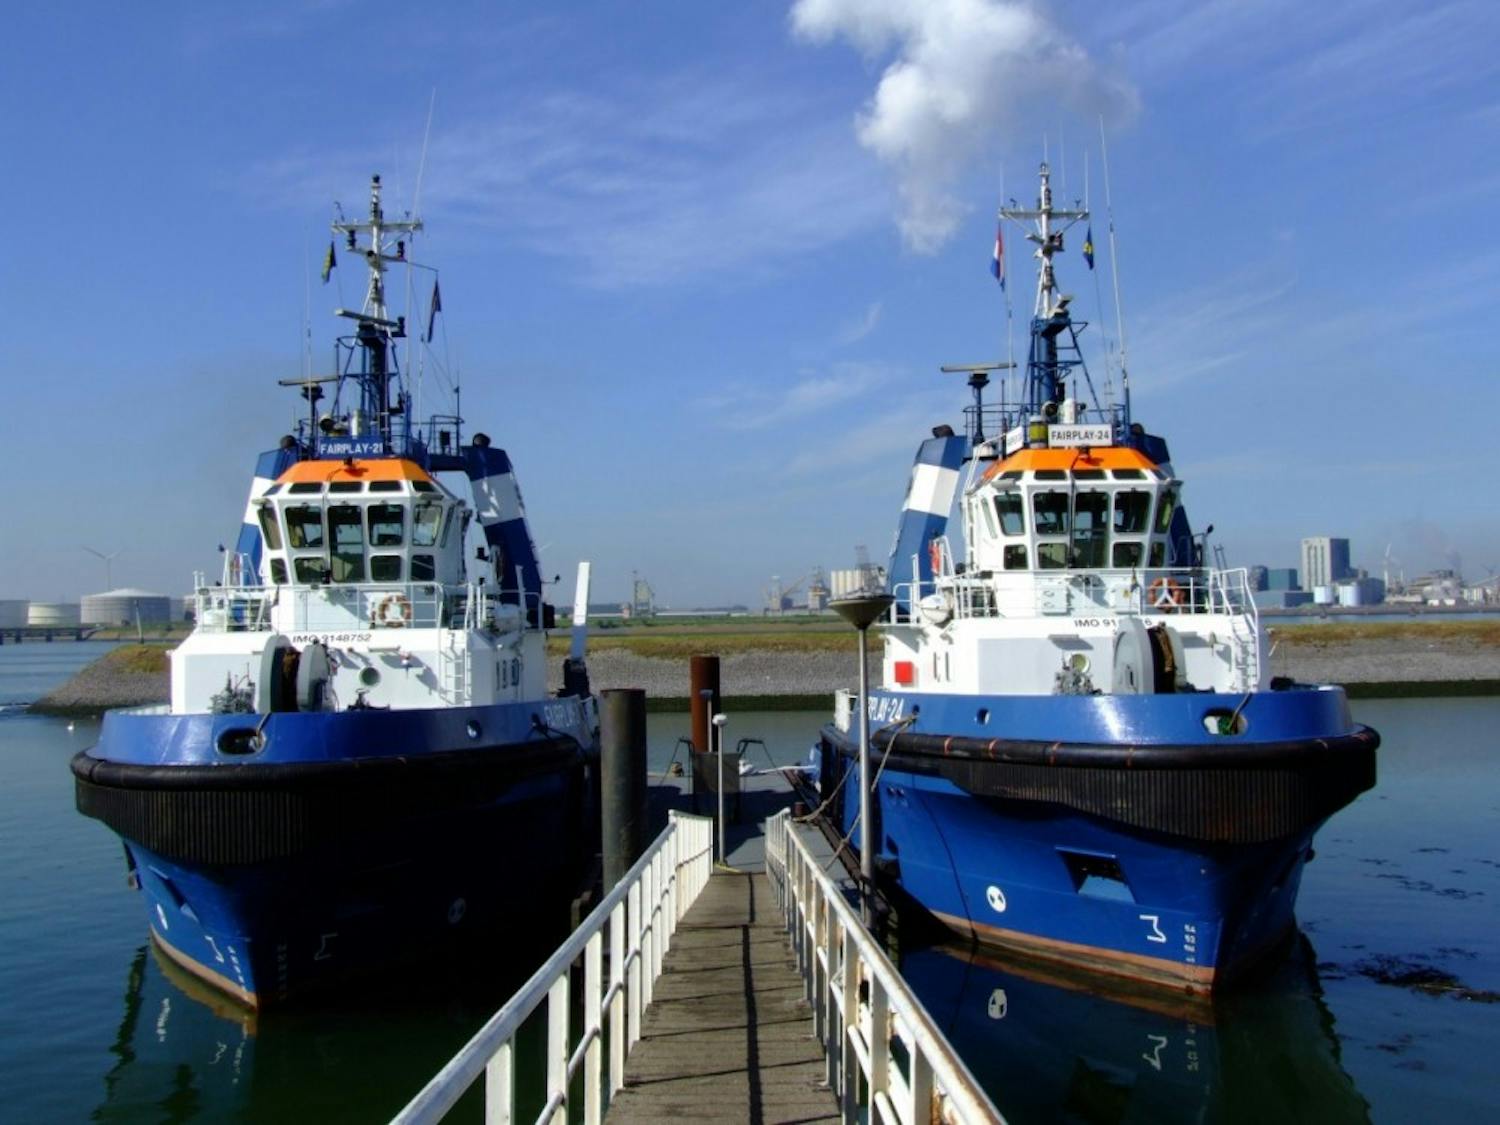 Two of the three supply boats exclusively carrying Crystal Light.